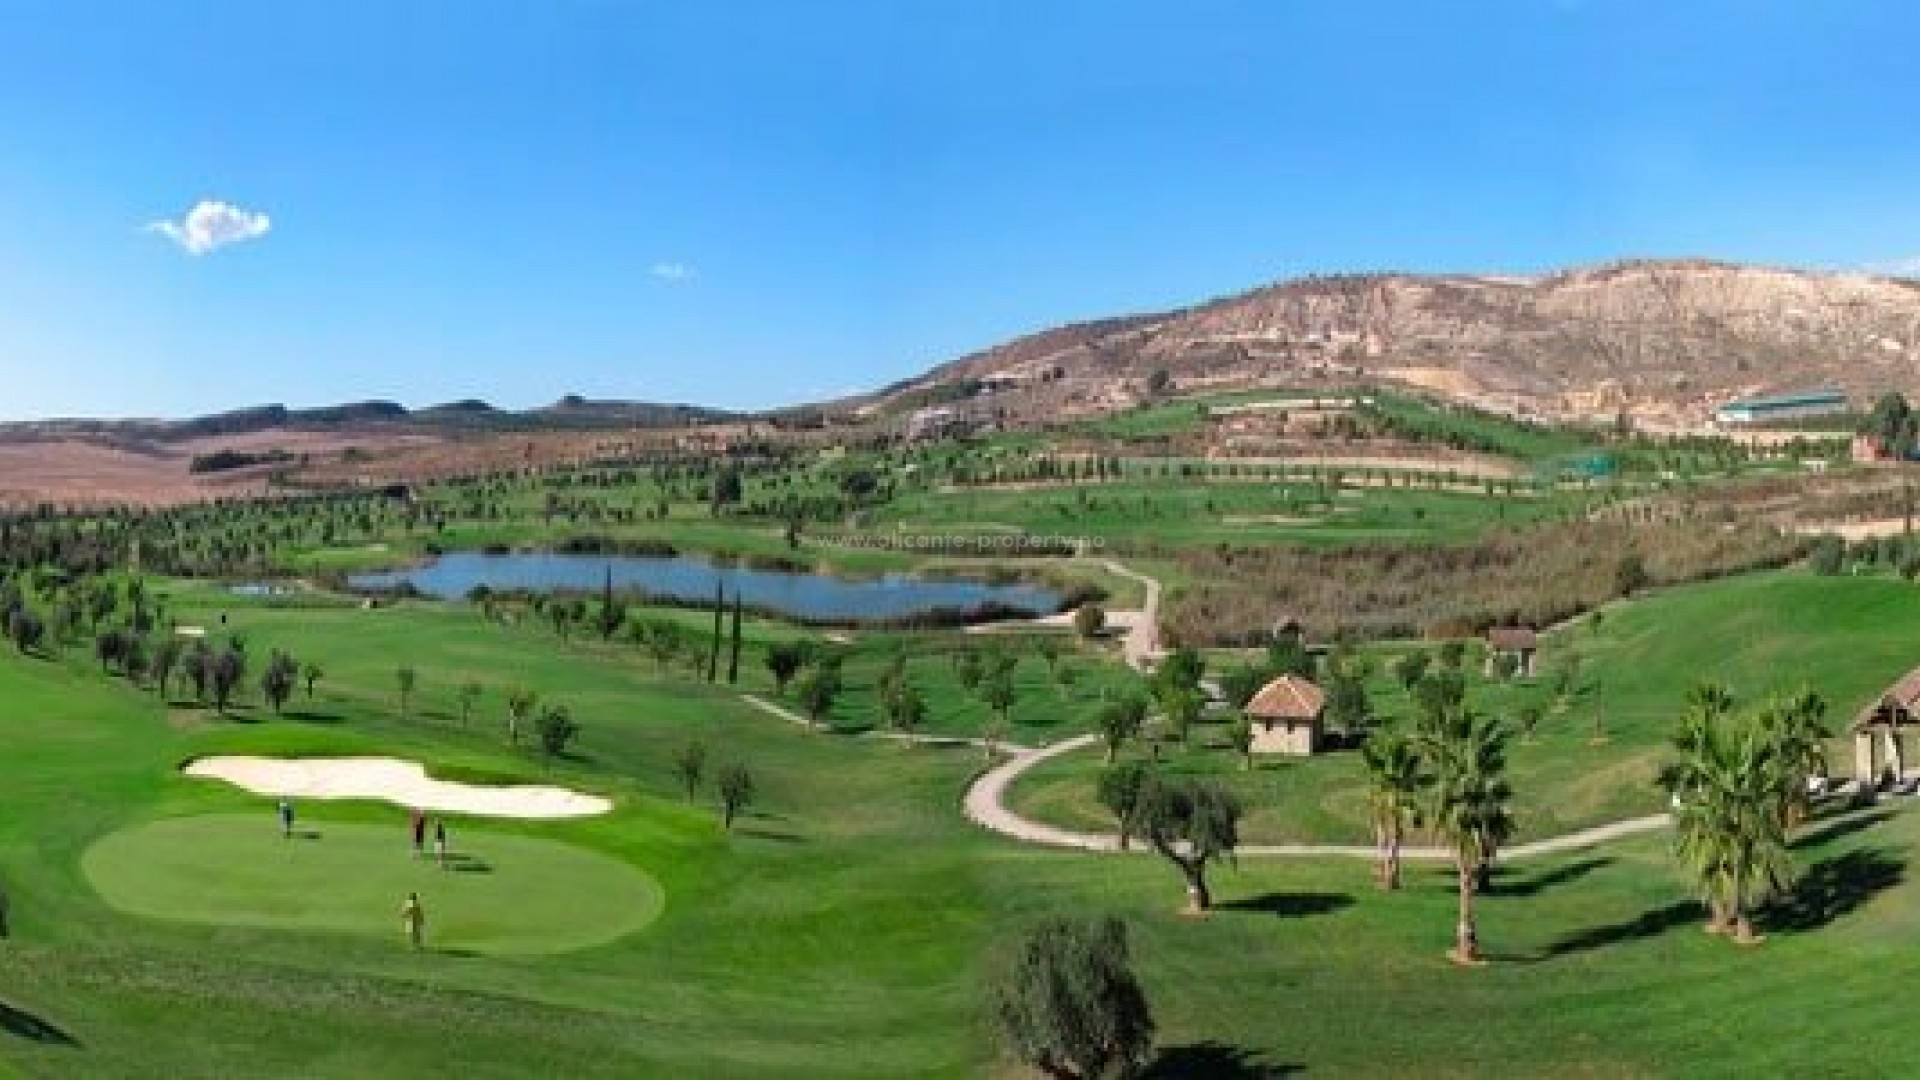 New residential complex in Algorfa (La Finca Golf course), house/detached house with 3 bedrooms and private garden with pool, semi-finished basement